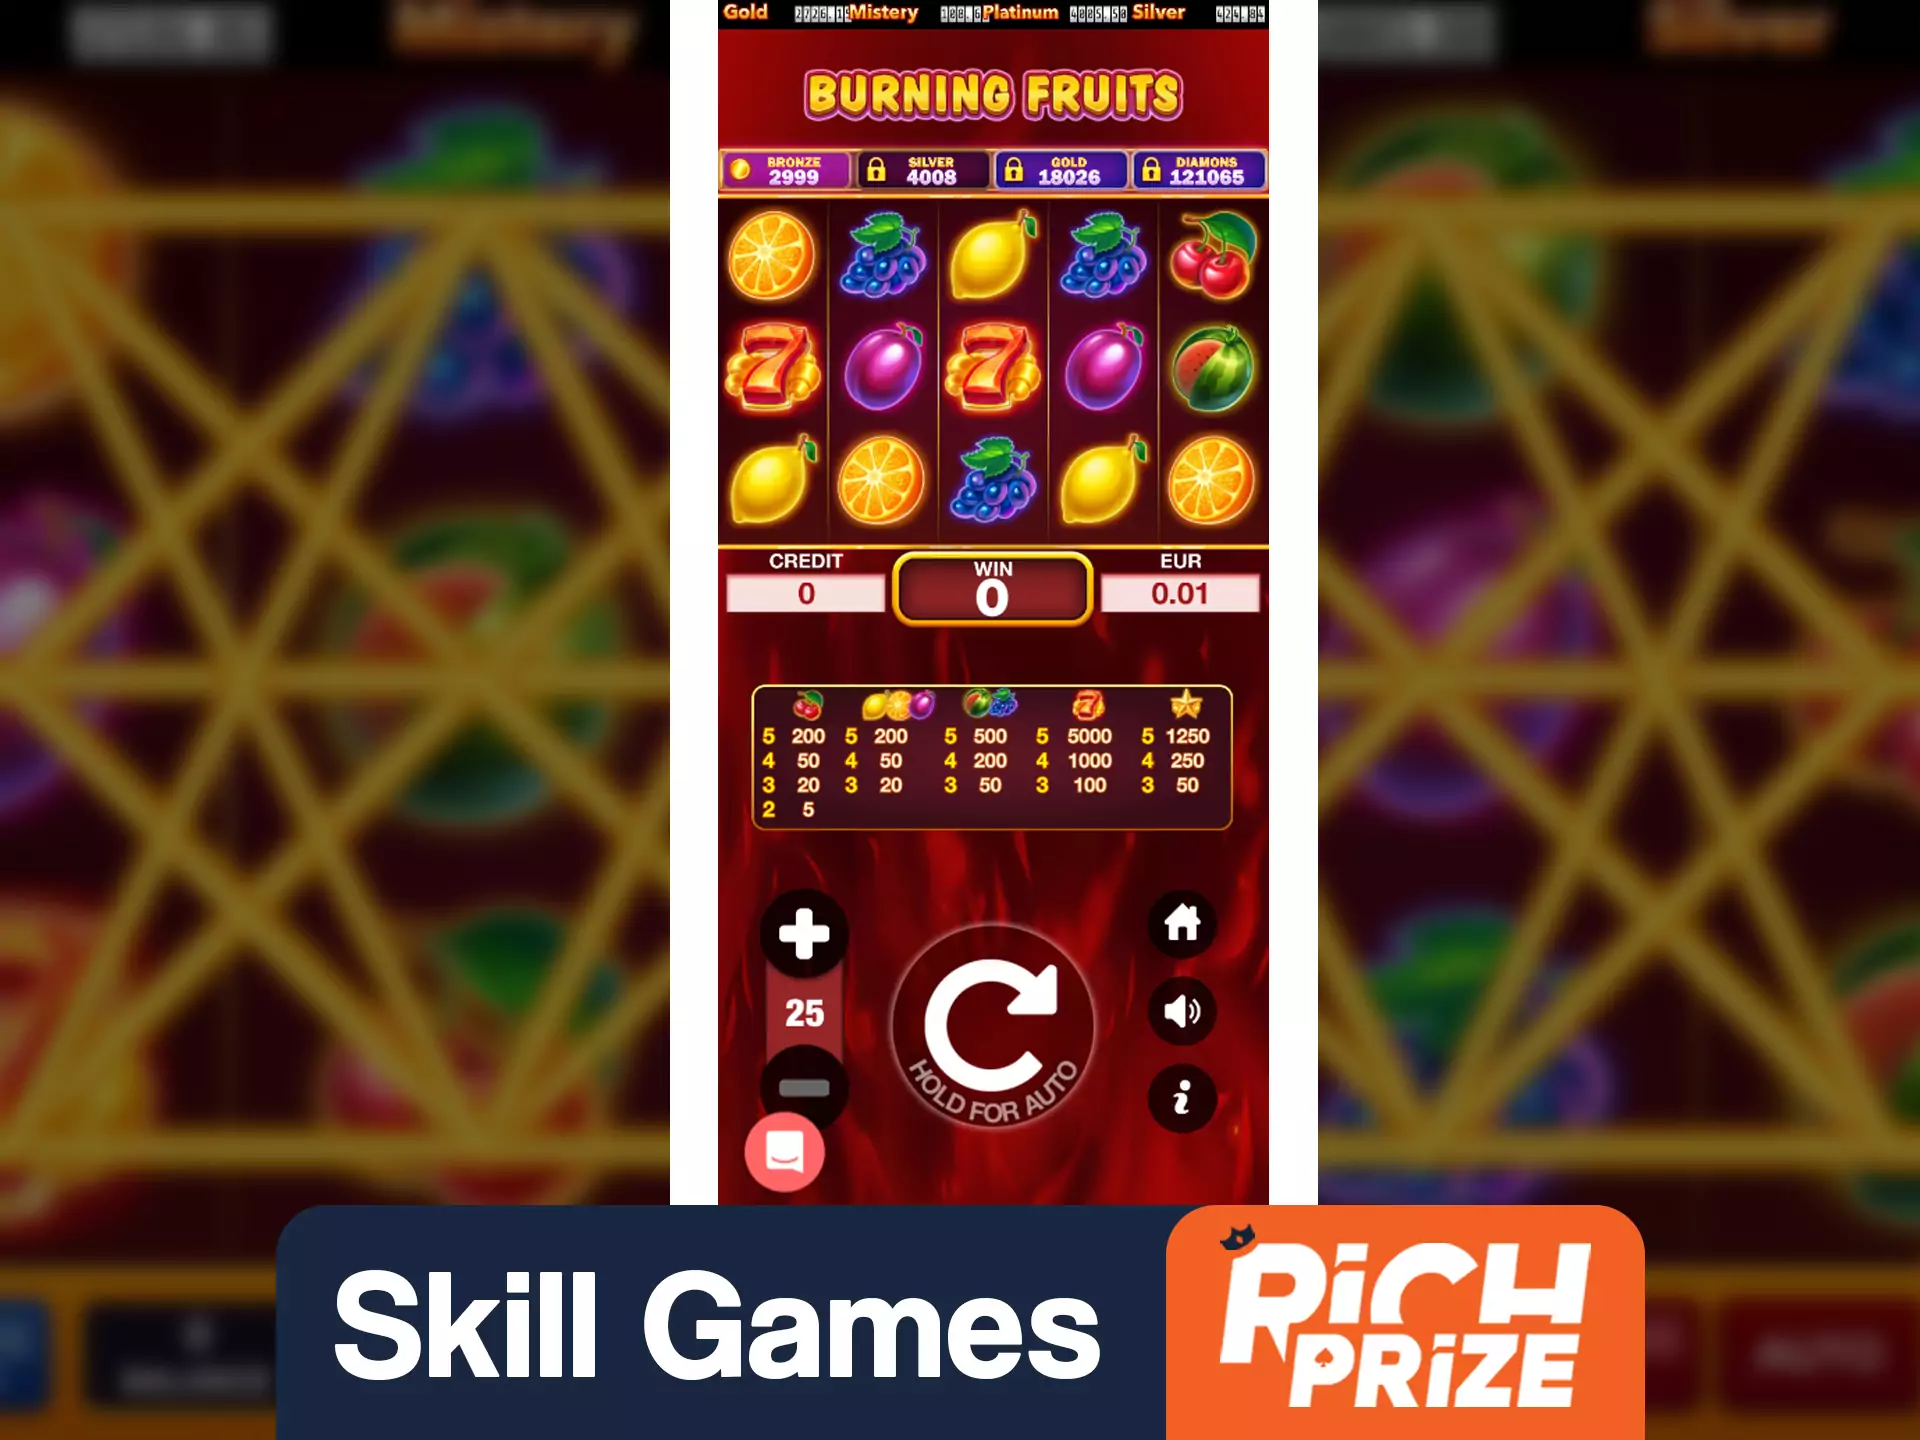 Try yourself in RichPrize skill games.